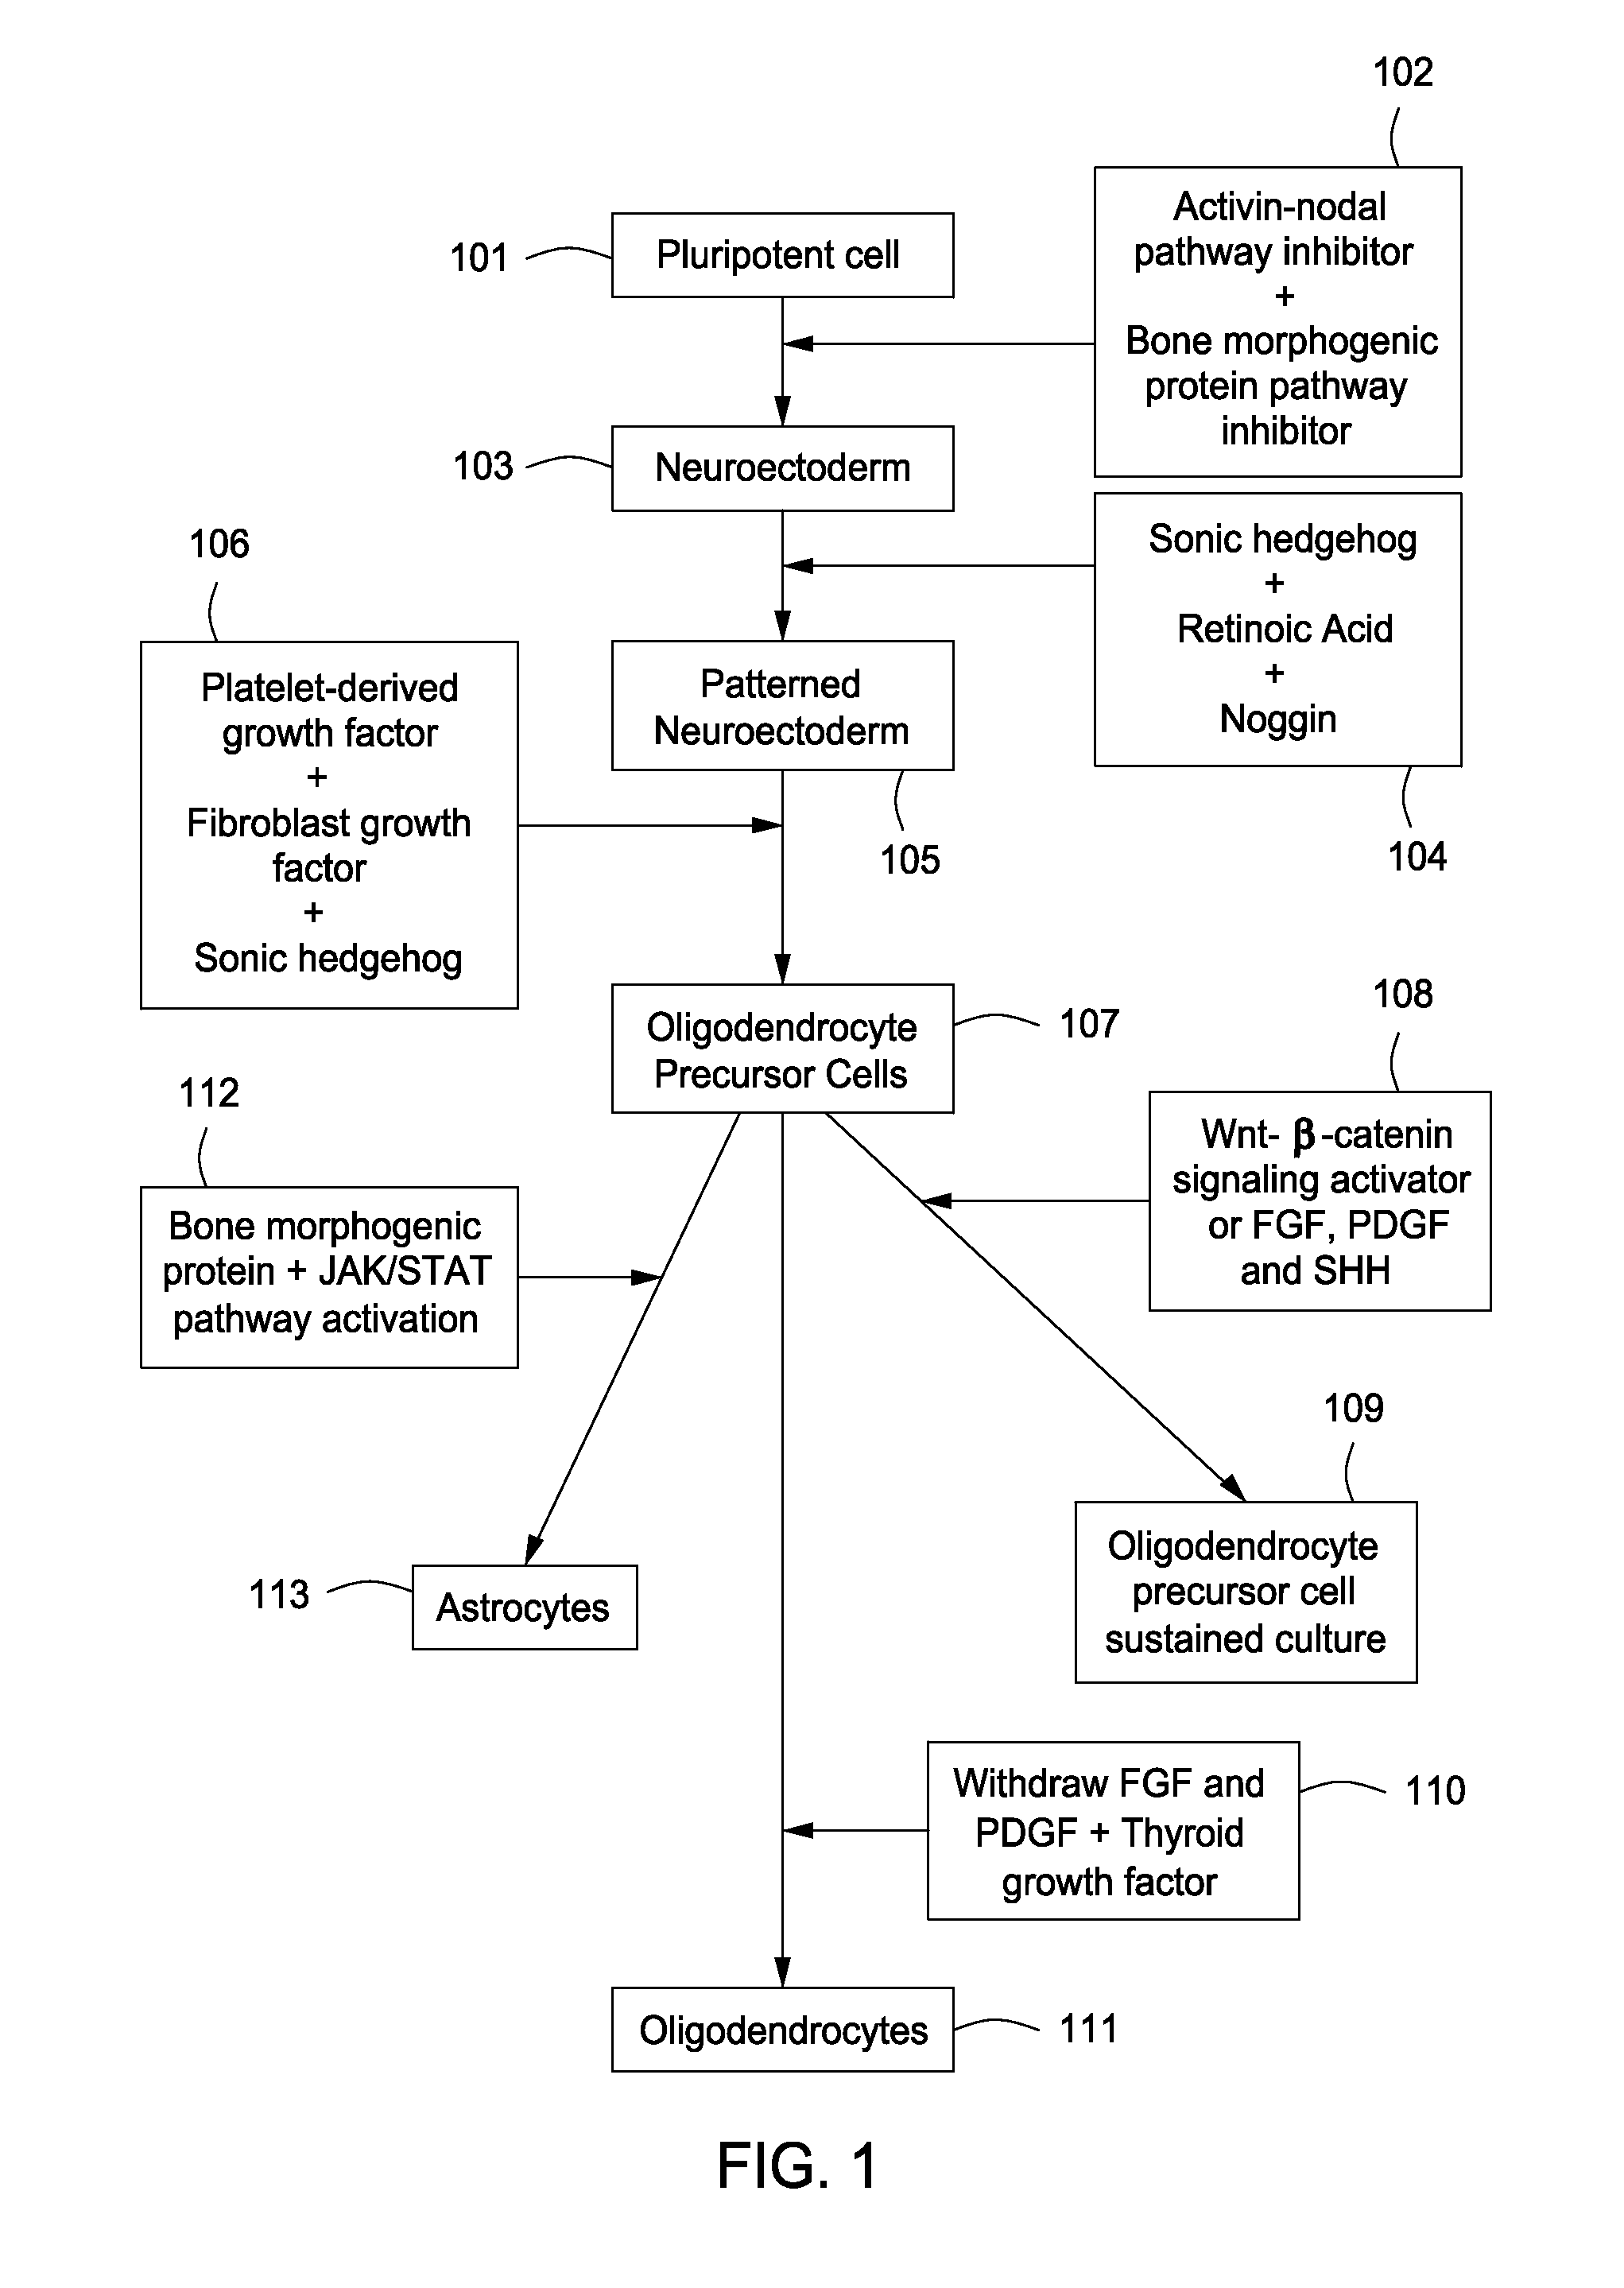 Differentiation method for production of glial cell populations